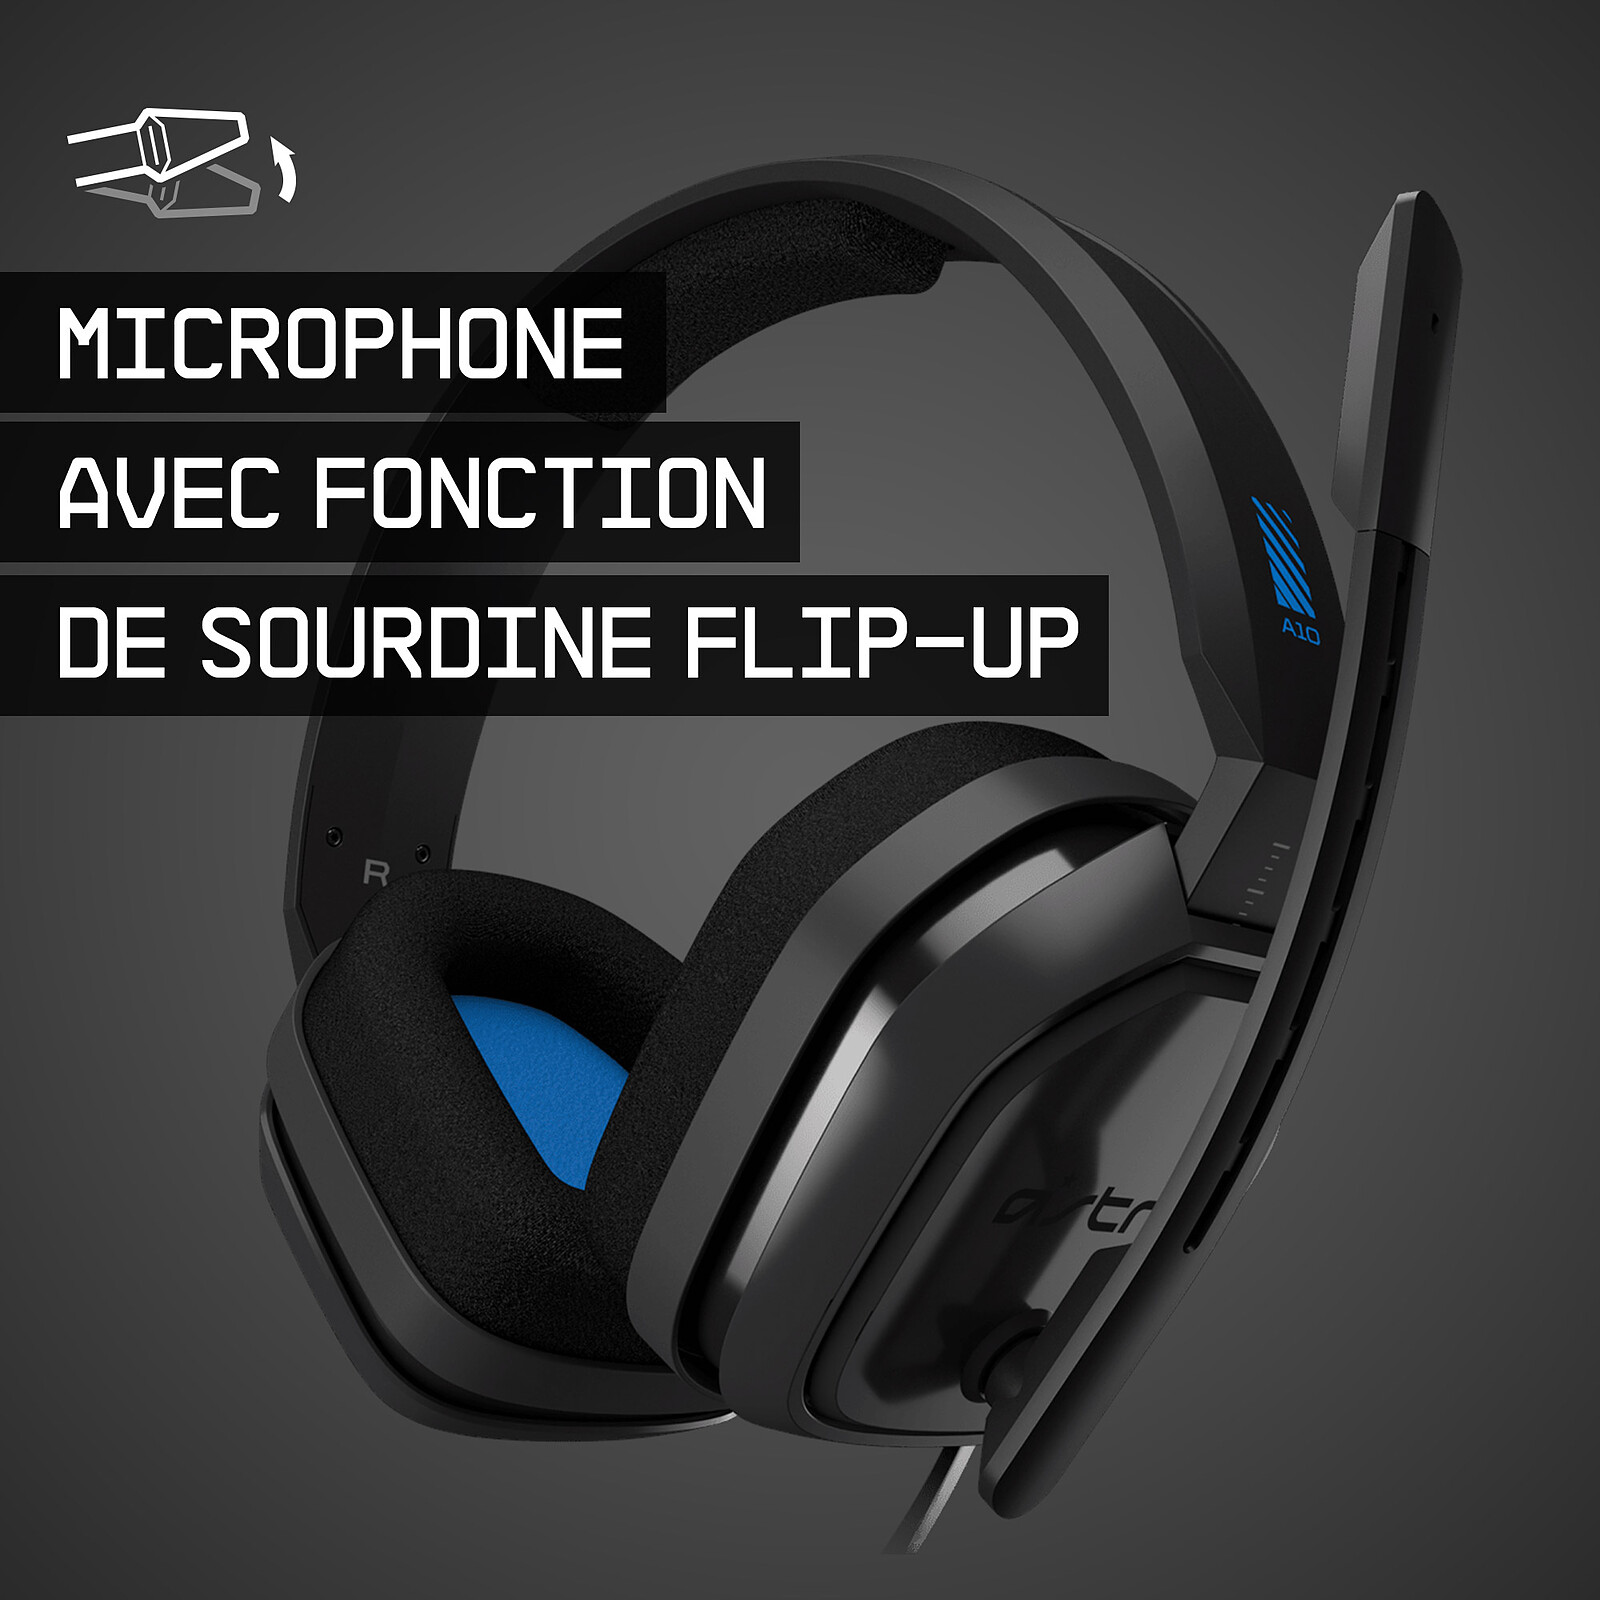 Astro A10 Gris/Azul (PC/Mac/Xbox One/PlayStation 4/Switch/Mobile) - Auriculares  microfono - LDLC